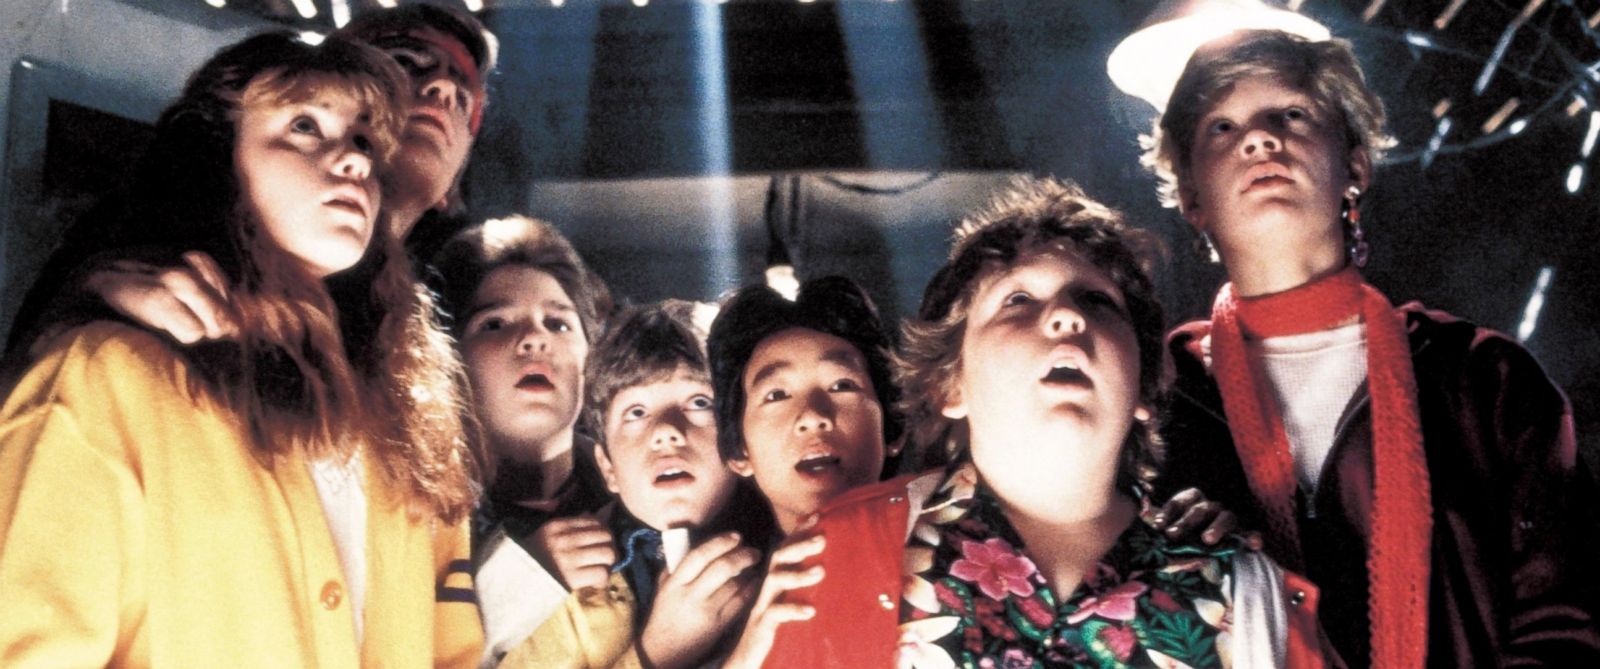 What Every Process Engineer Can Learn From The Goonies